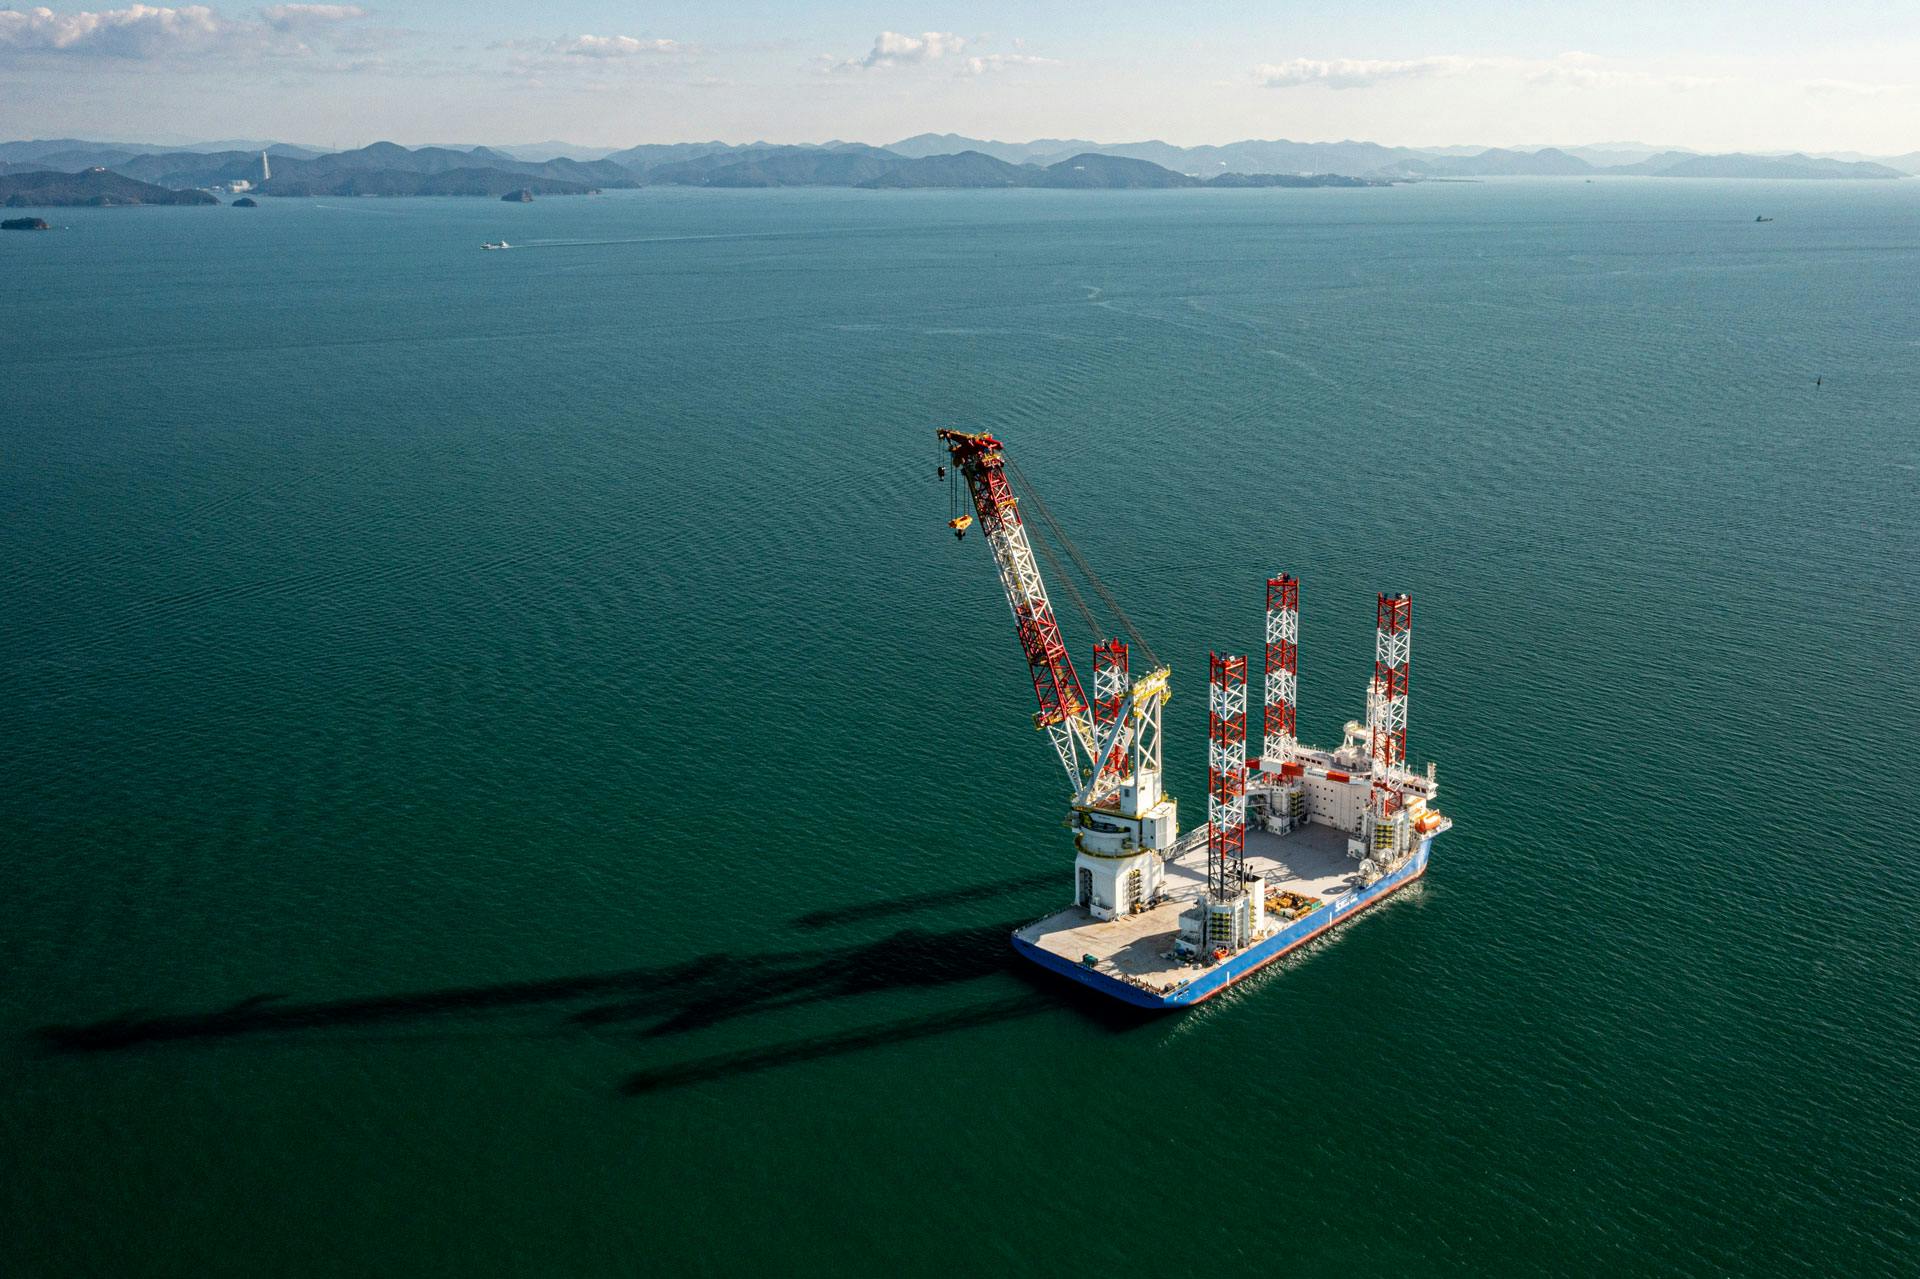 Wide shot of a Blue Wind Shimizu Telescopic leg crane offshore, with land and moutaintops in the background